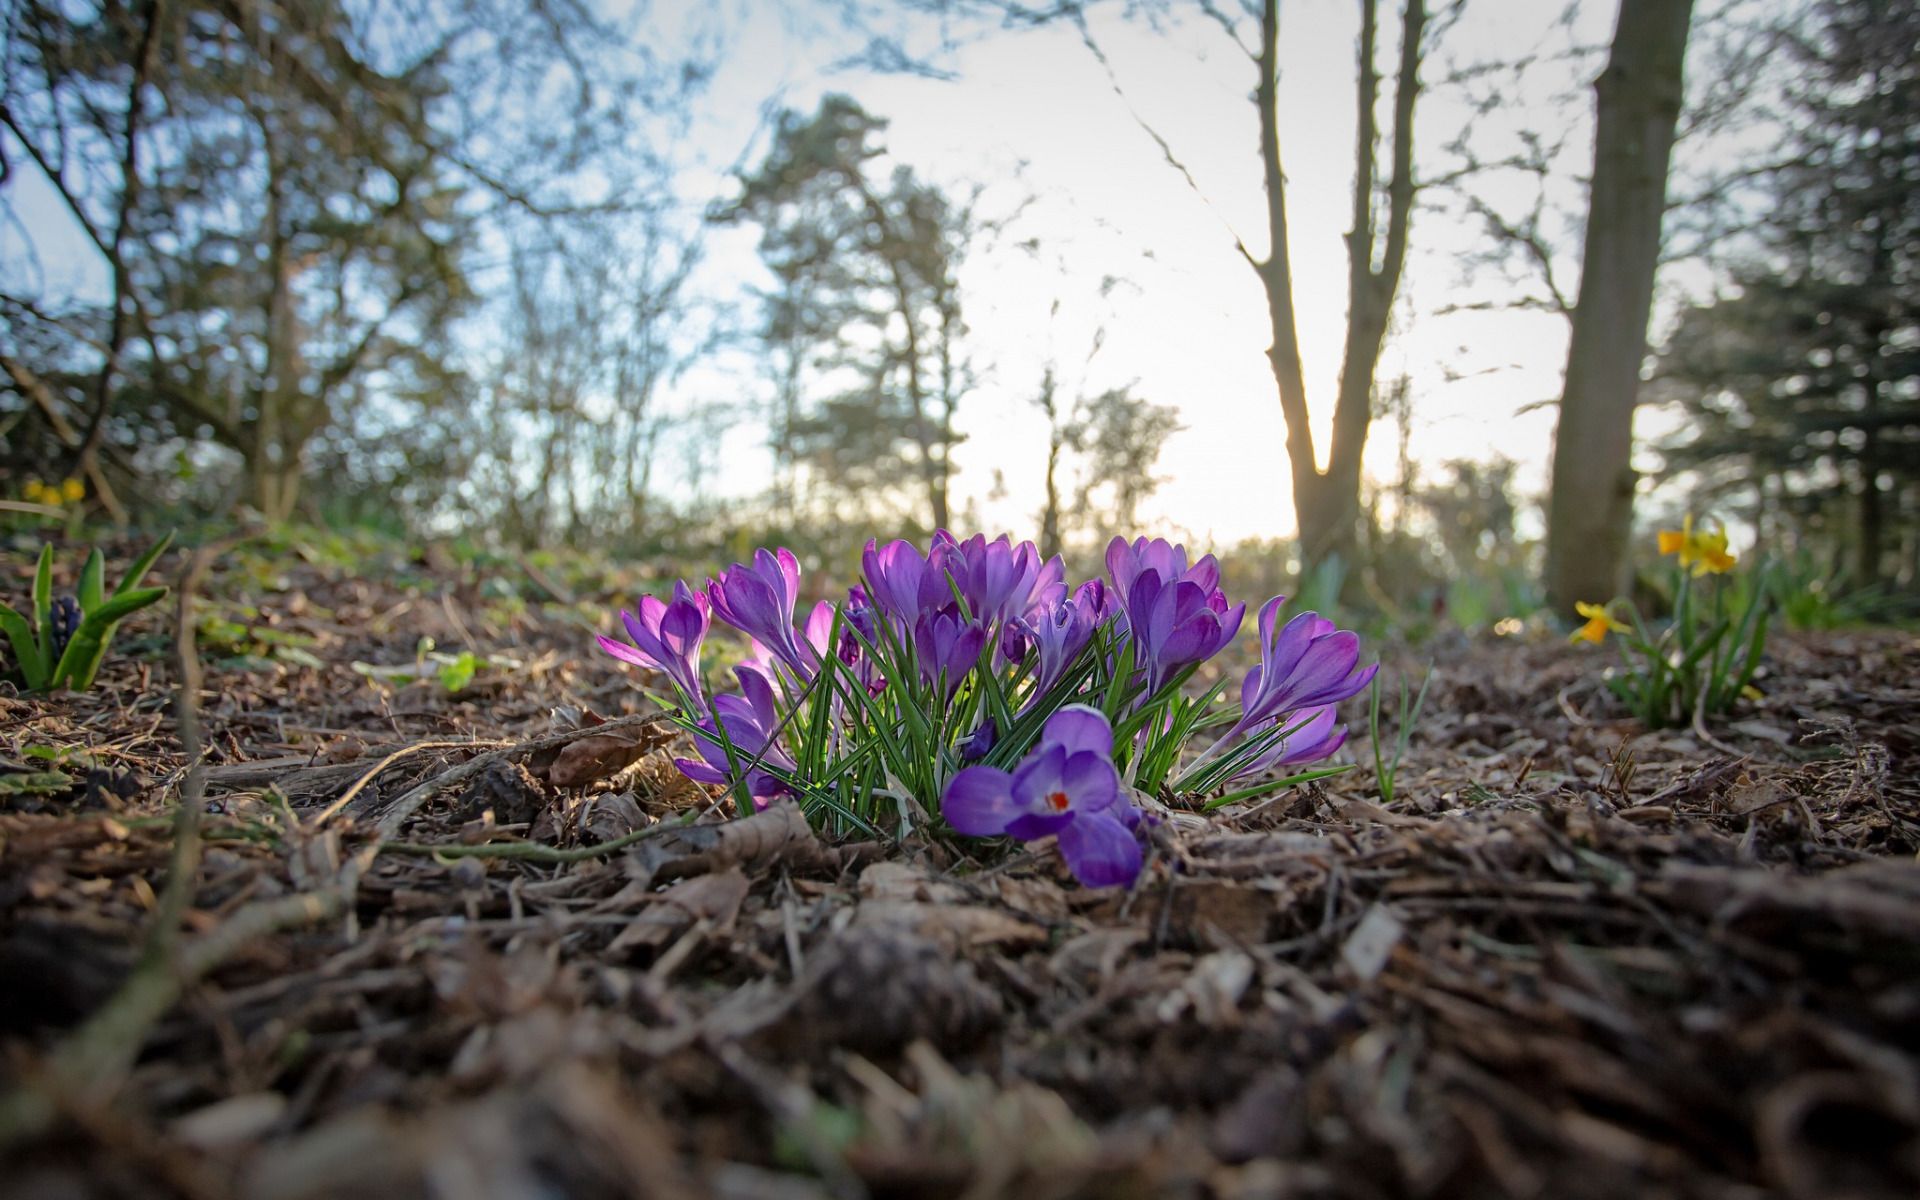 Download wallpaper Crocuses, forest, morning, sunrise, spring, purple spring flowers for desktop with resolution 1920x1200. High Quality HD picture wallpaper